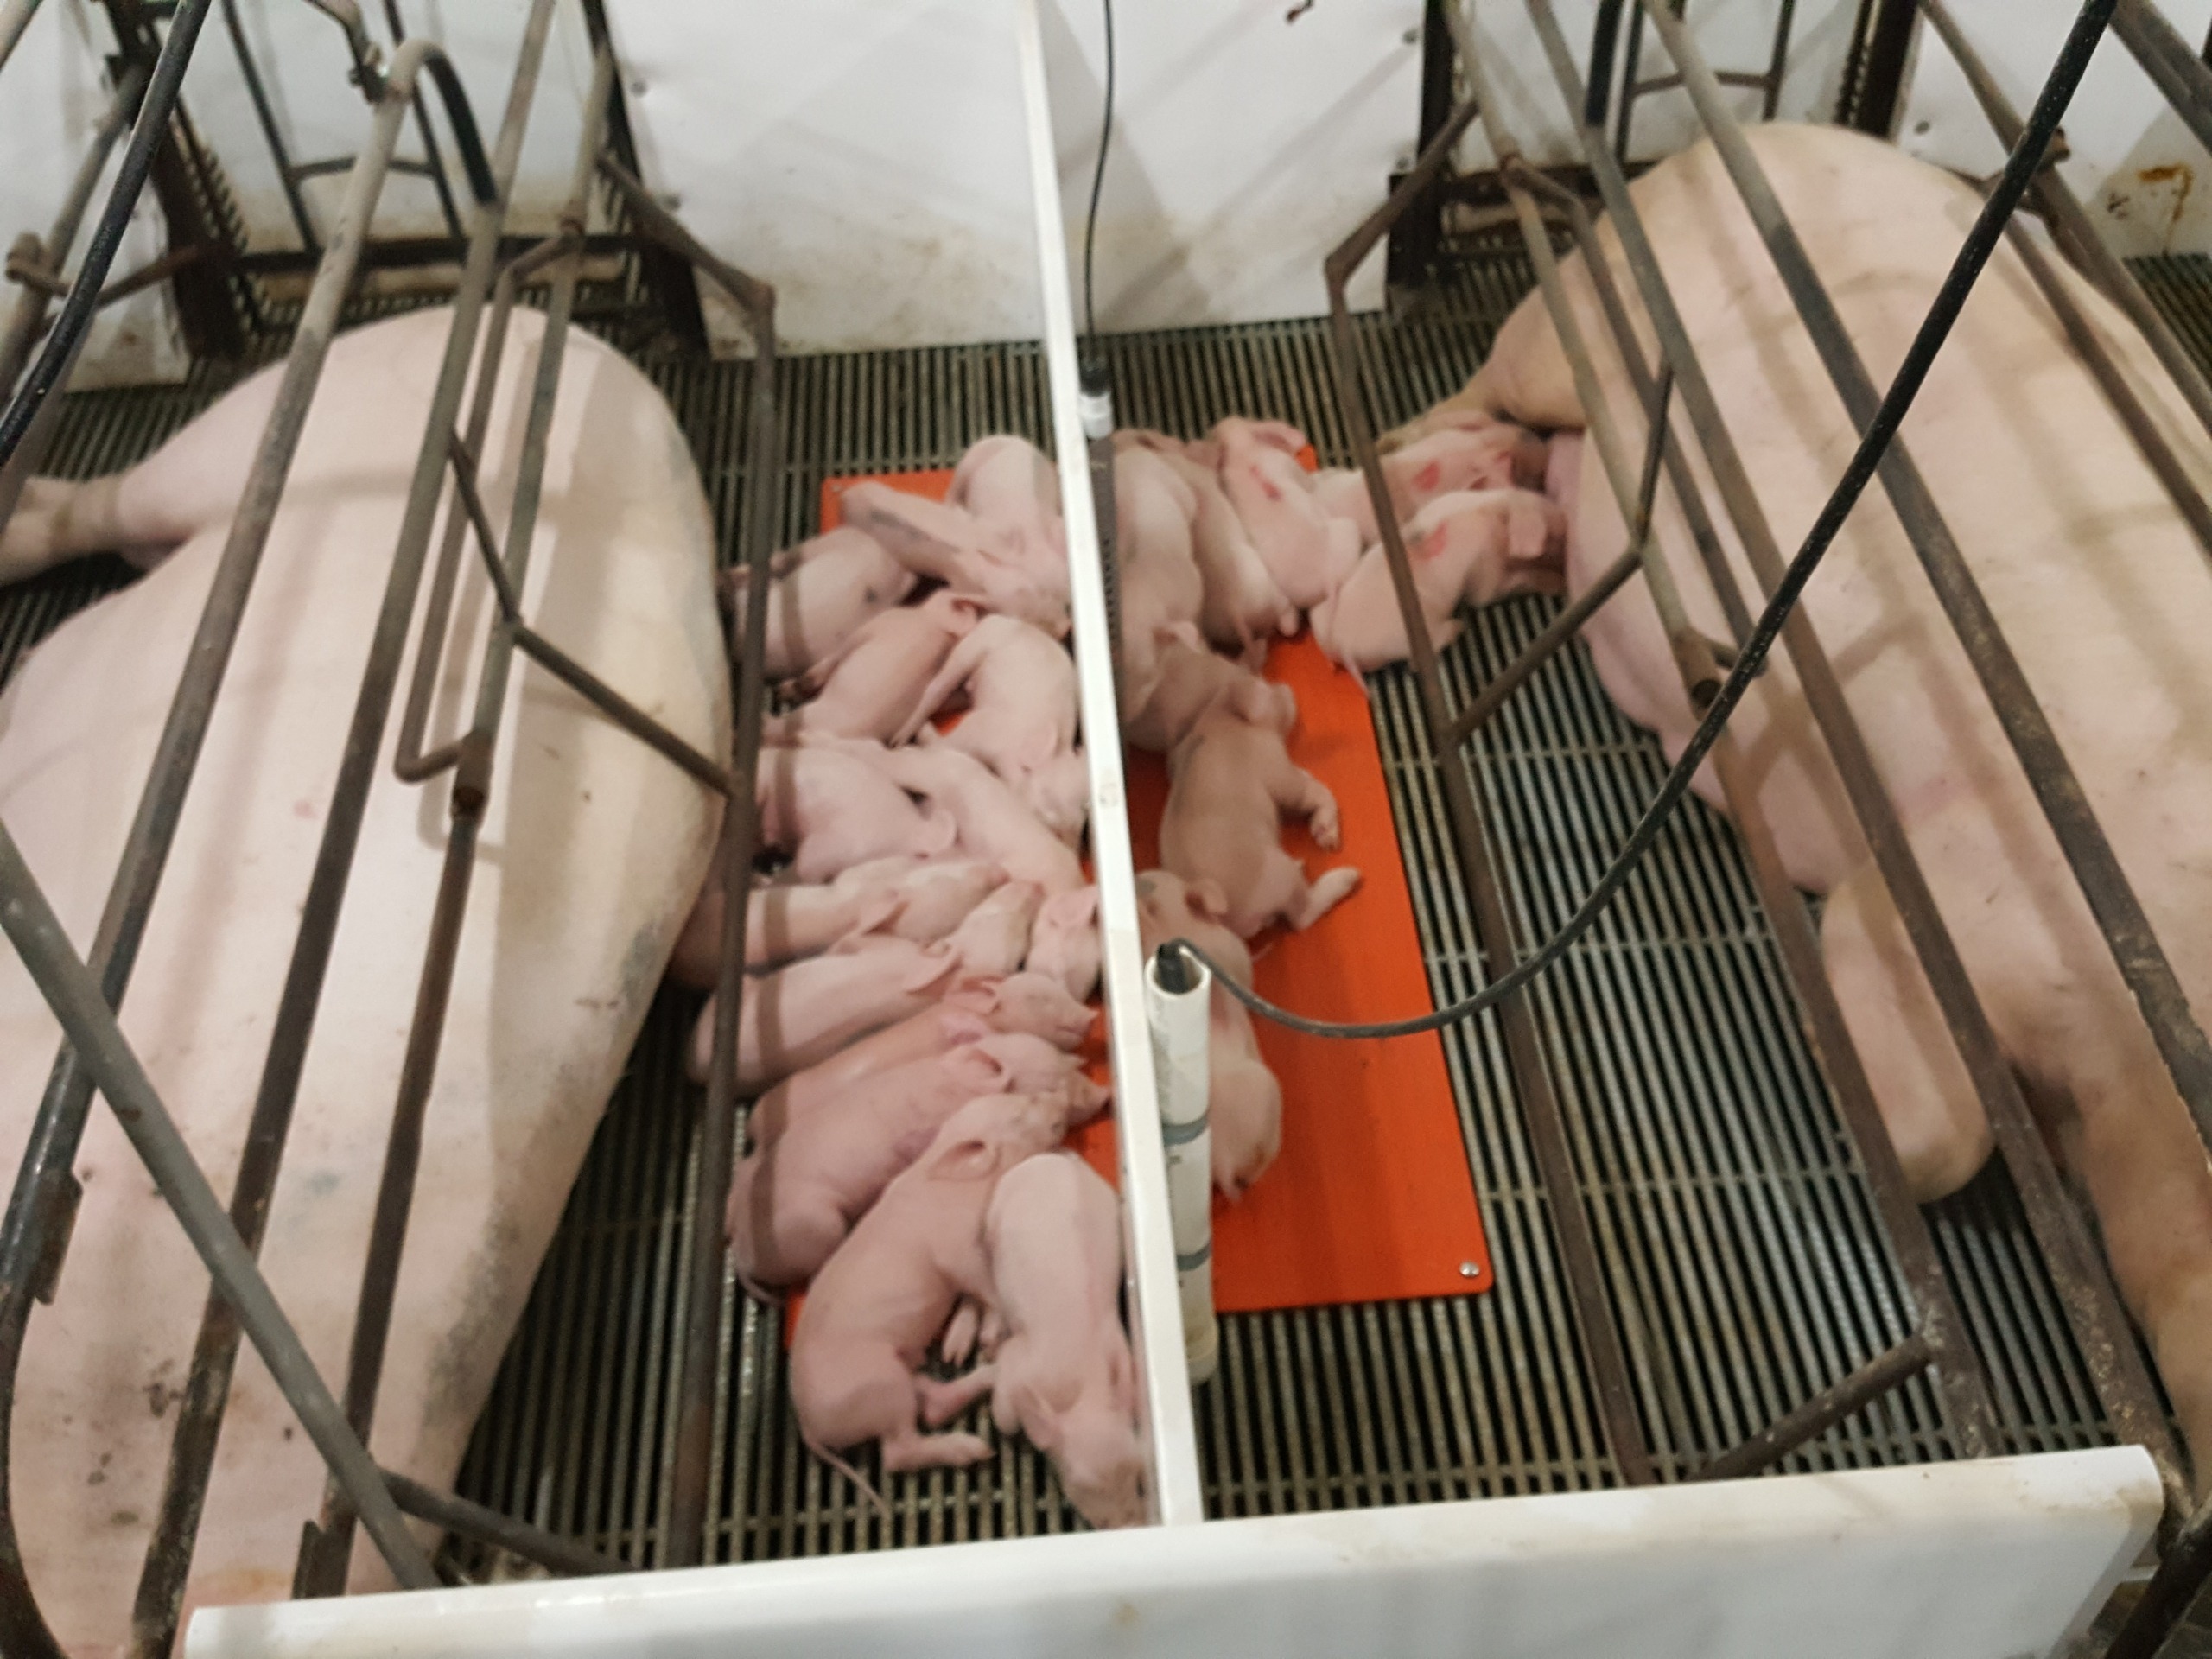 Batch farrowing is a strategy that can improve hog health